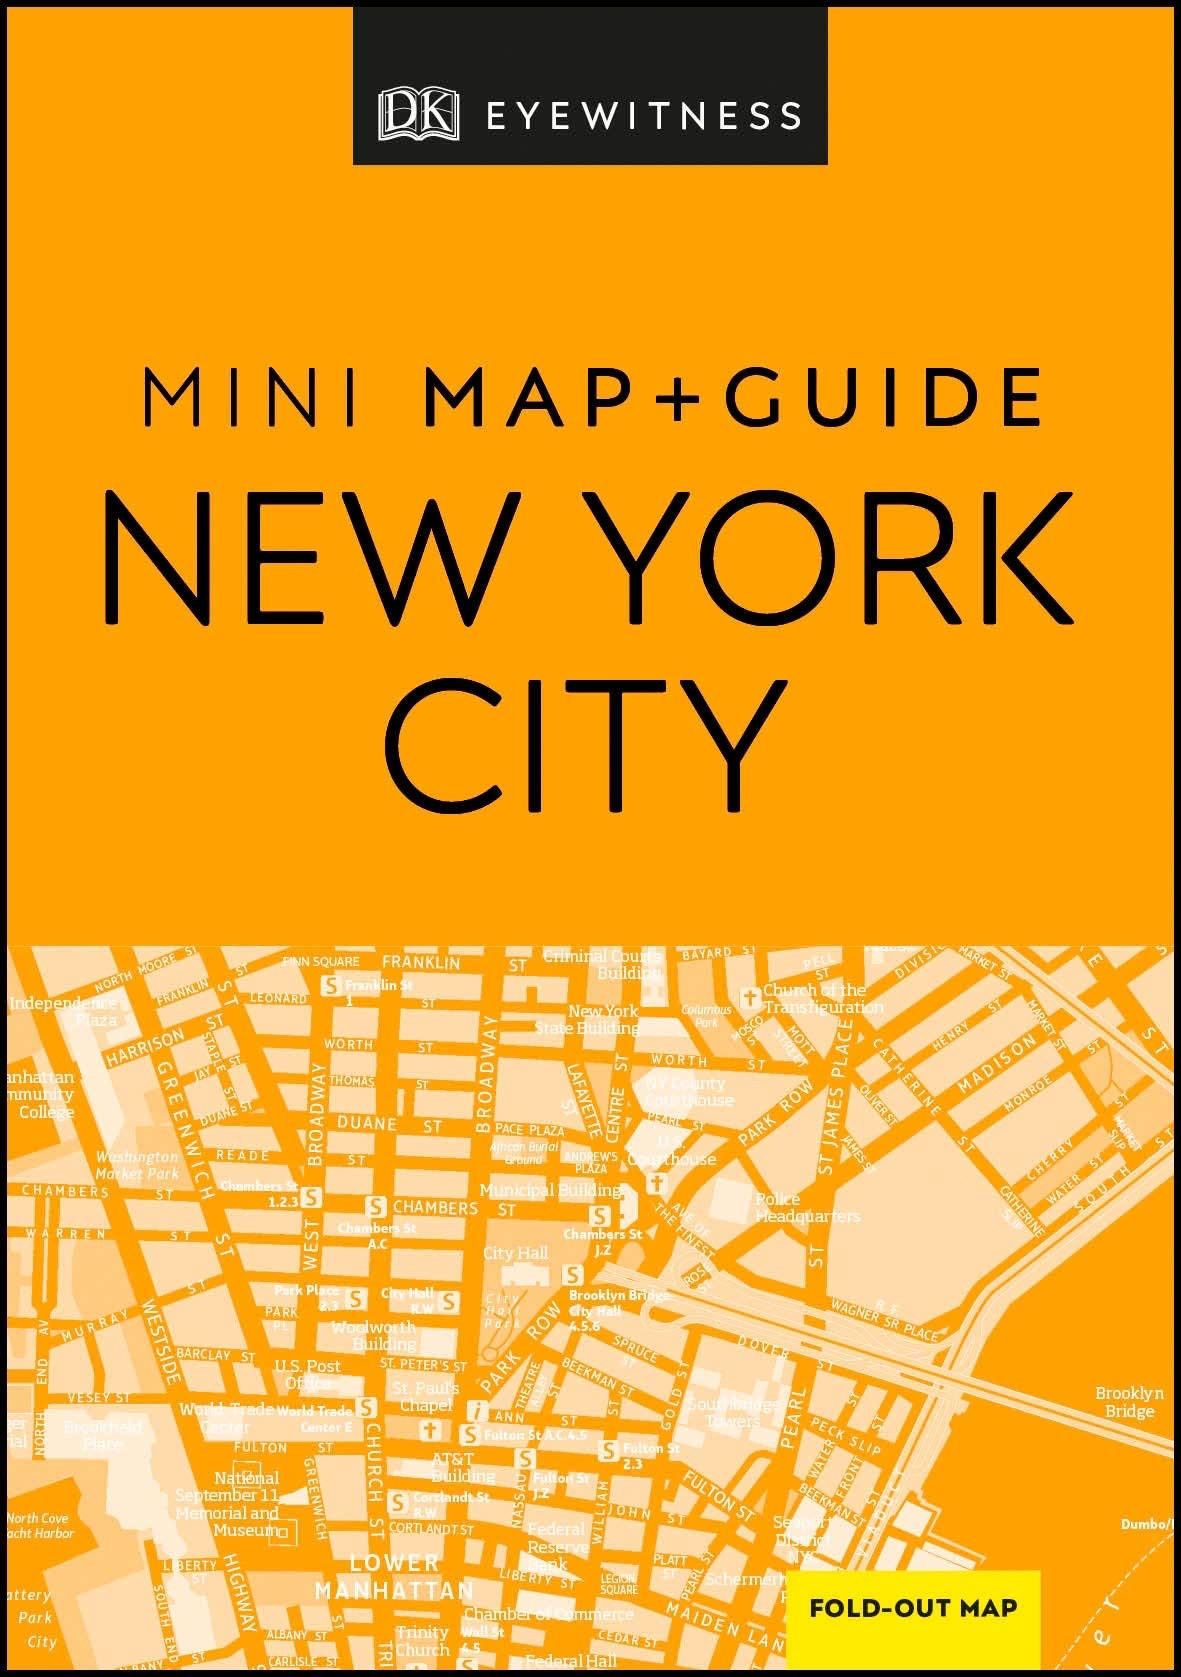 DK Eyewitness New York City Mini Map and Guide (Pocket Travel Guide)